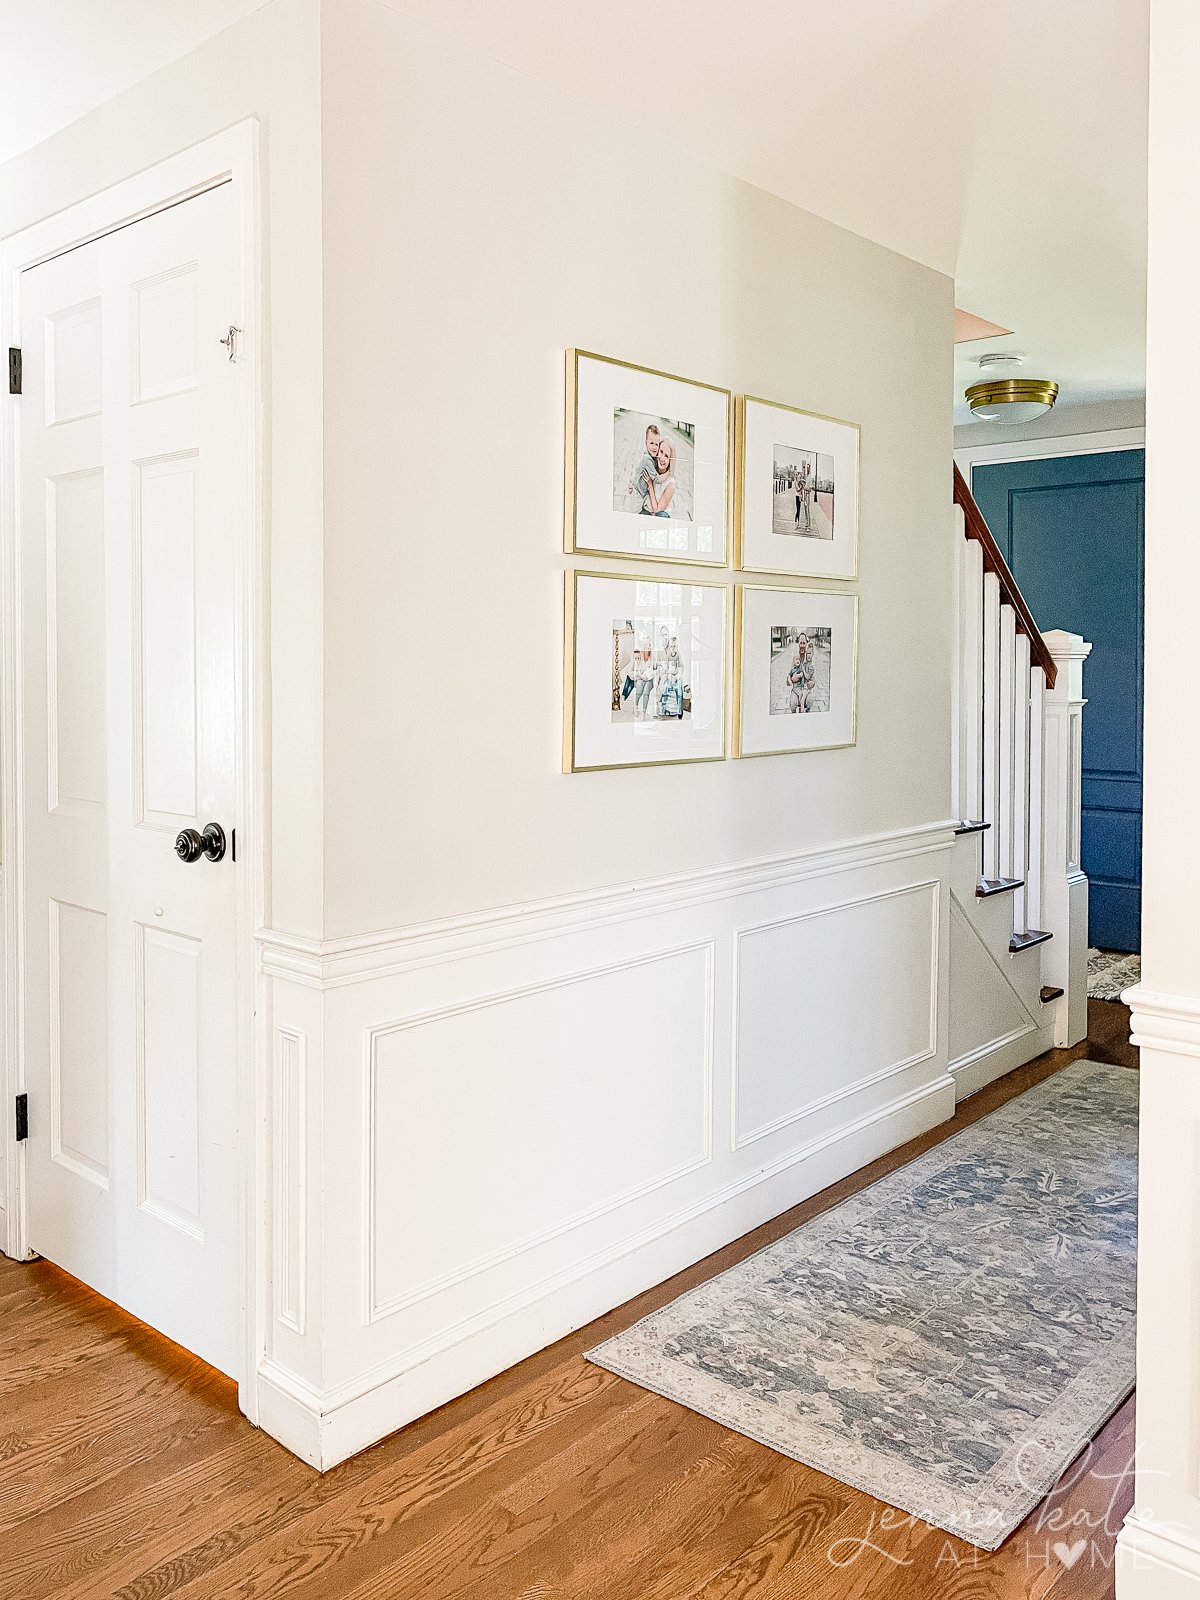 pure white trim with repose gray walls lightened by 50%